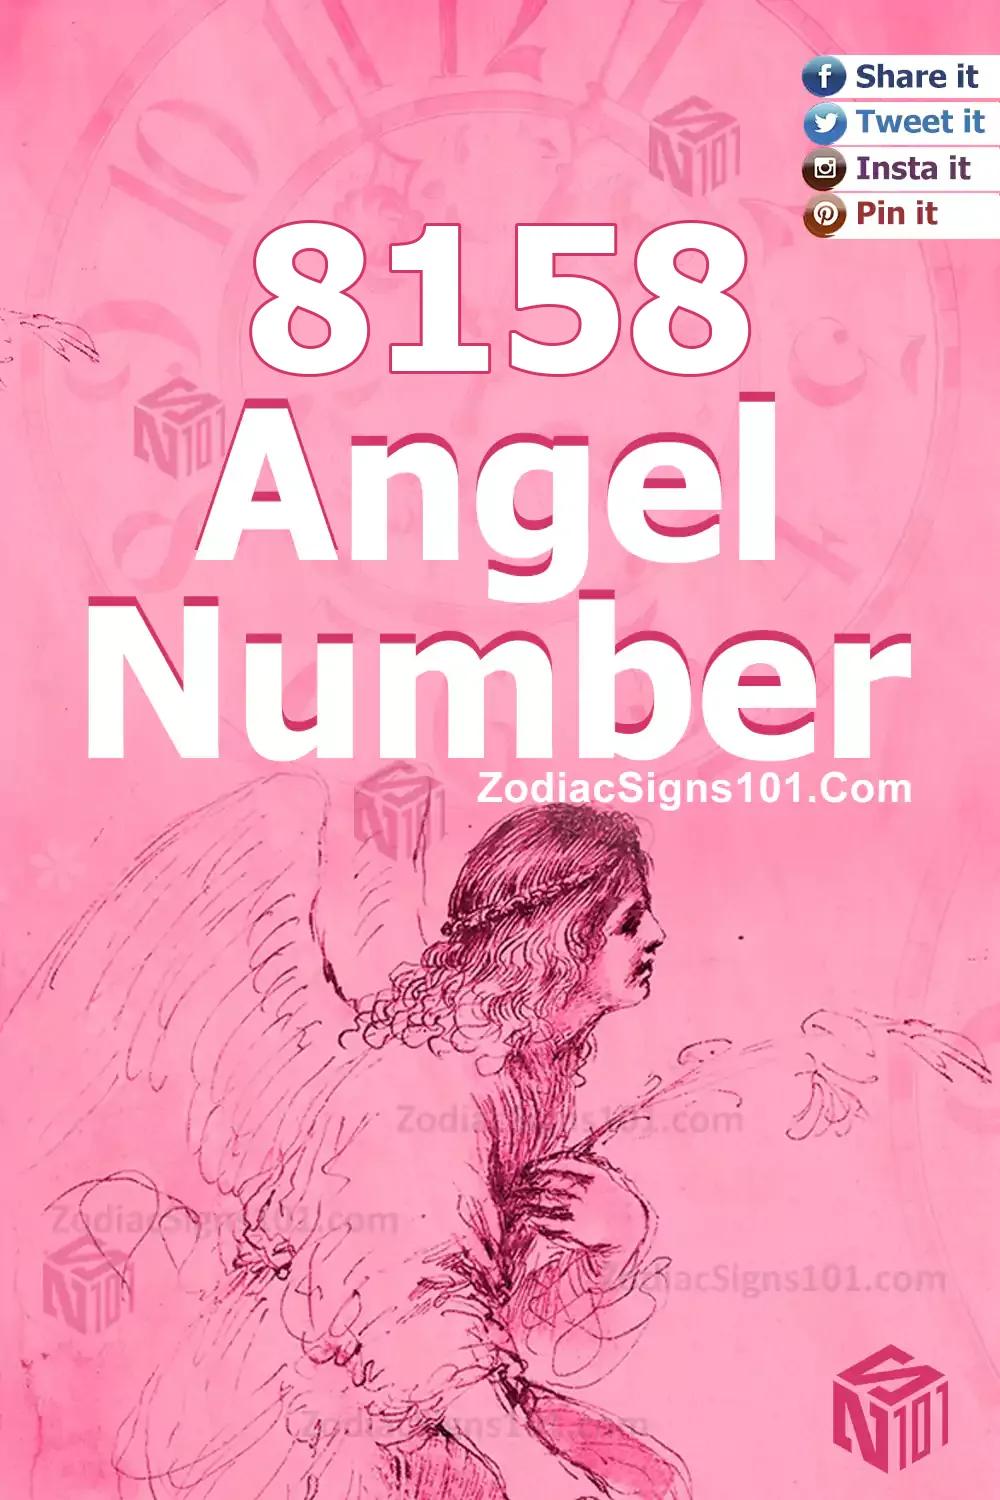 8158 Angel Number Meaning